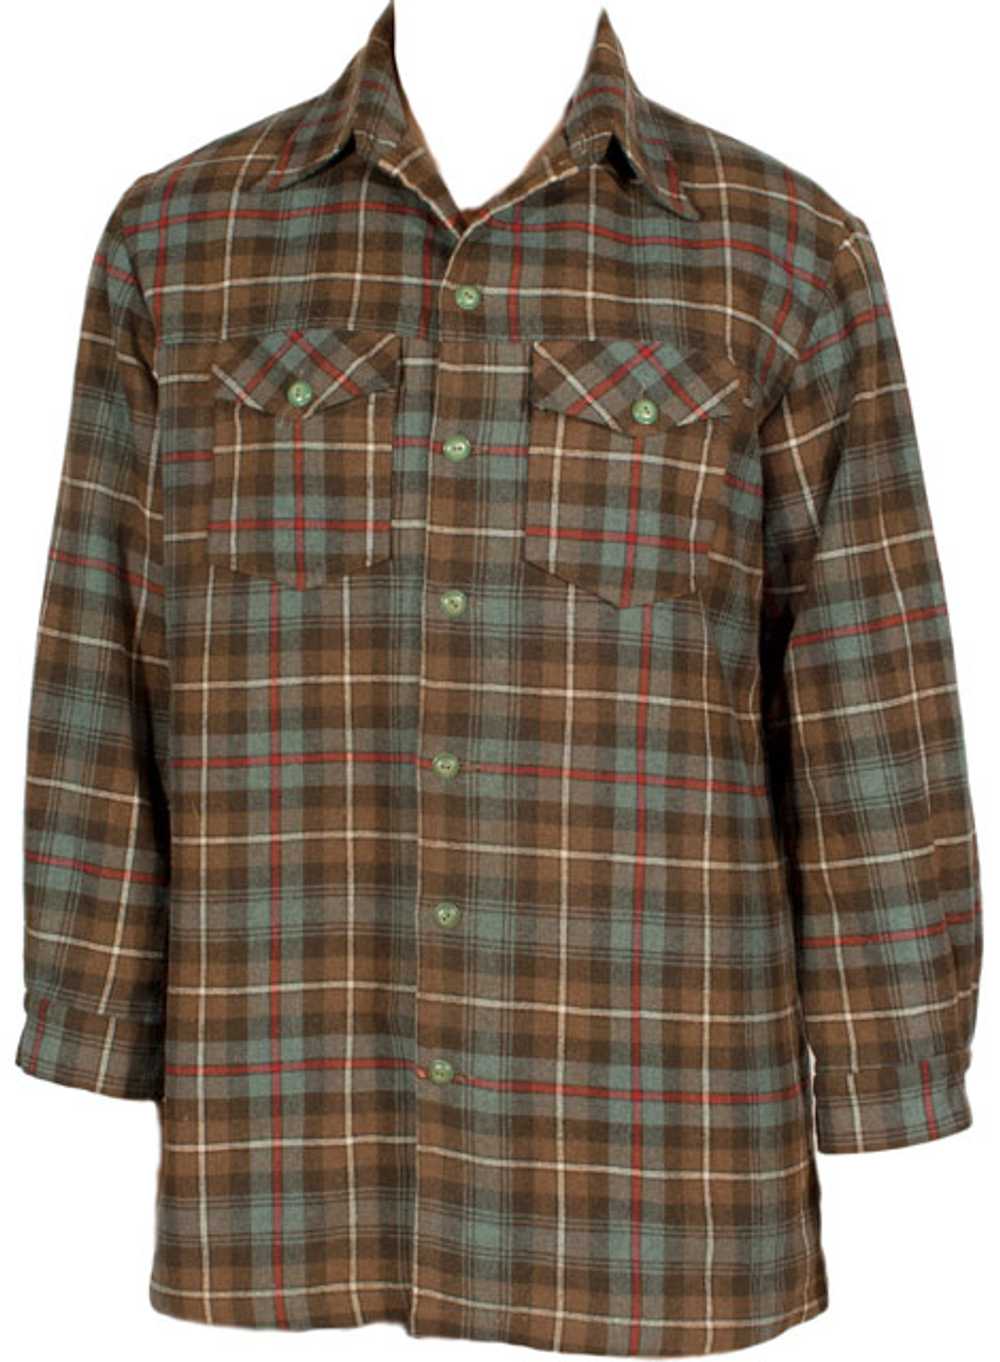 1950s Wool Flannel Shirt Jacket - image 1